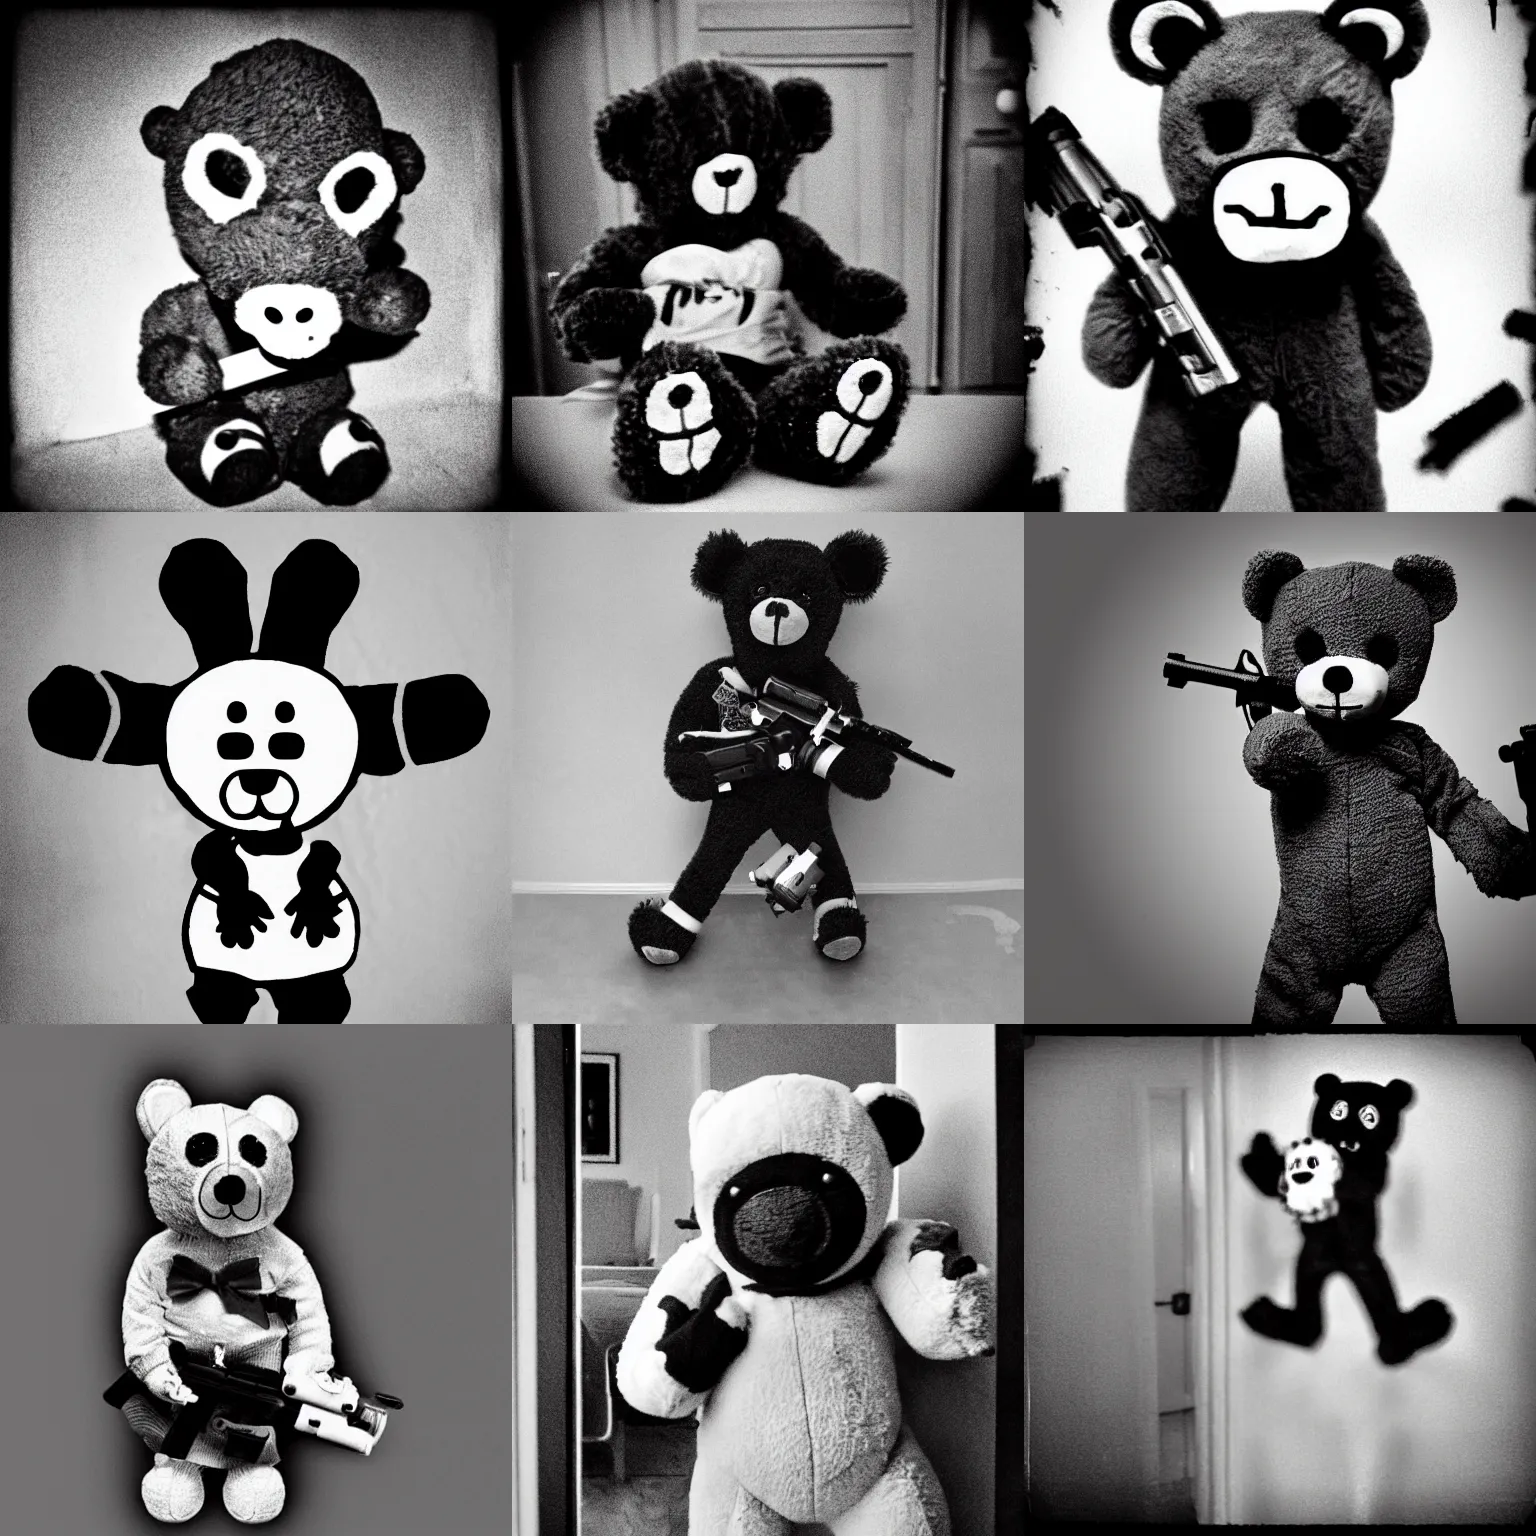 Prompt: found footage spooky horror teddy bear robbing your house with a gun and mask b & w grainy creepy dark